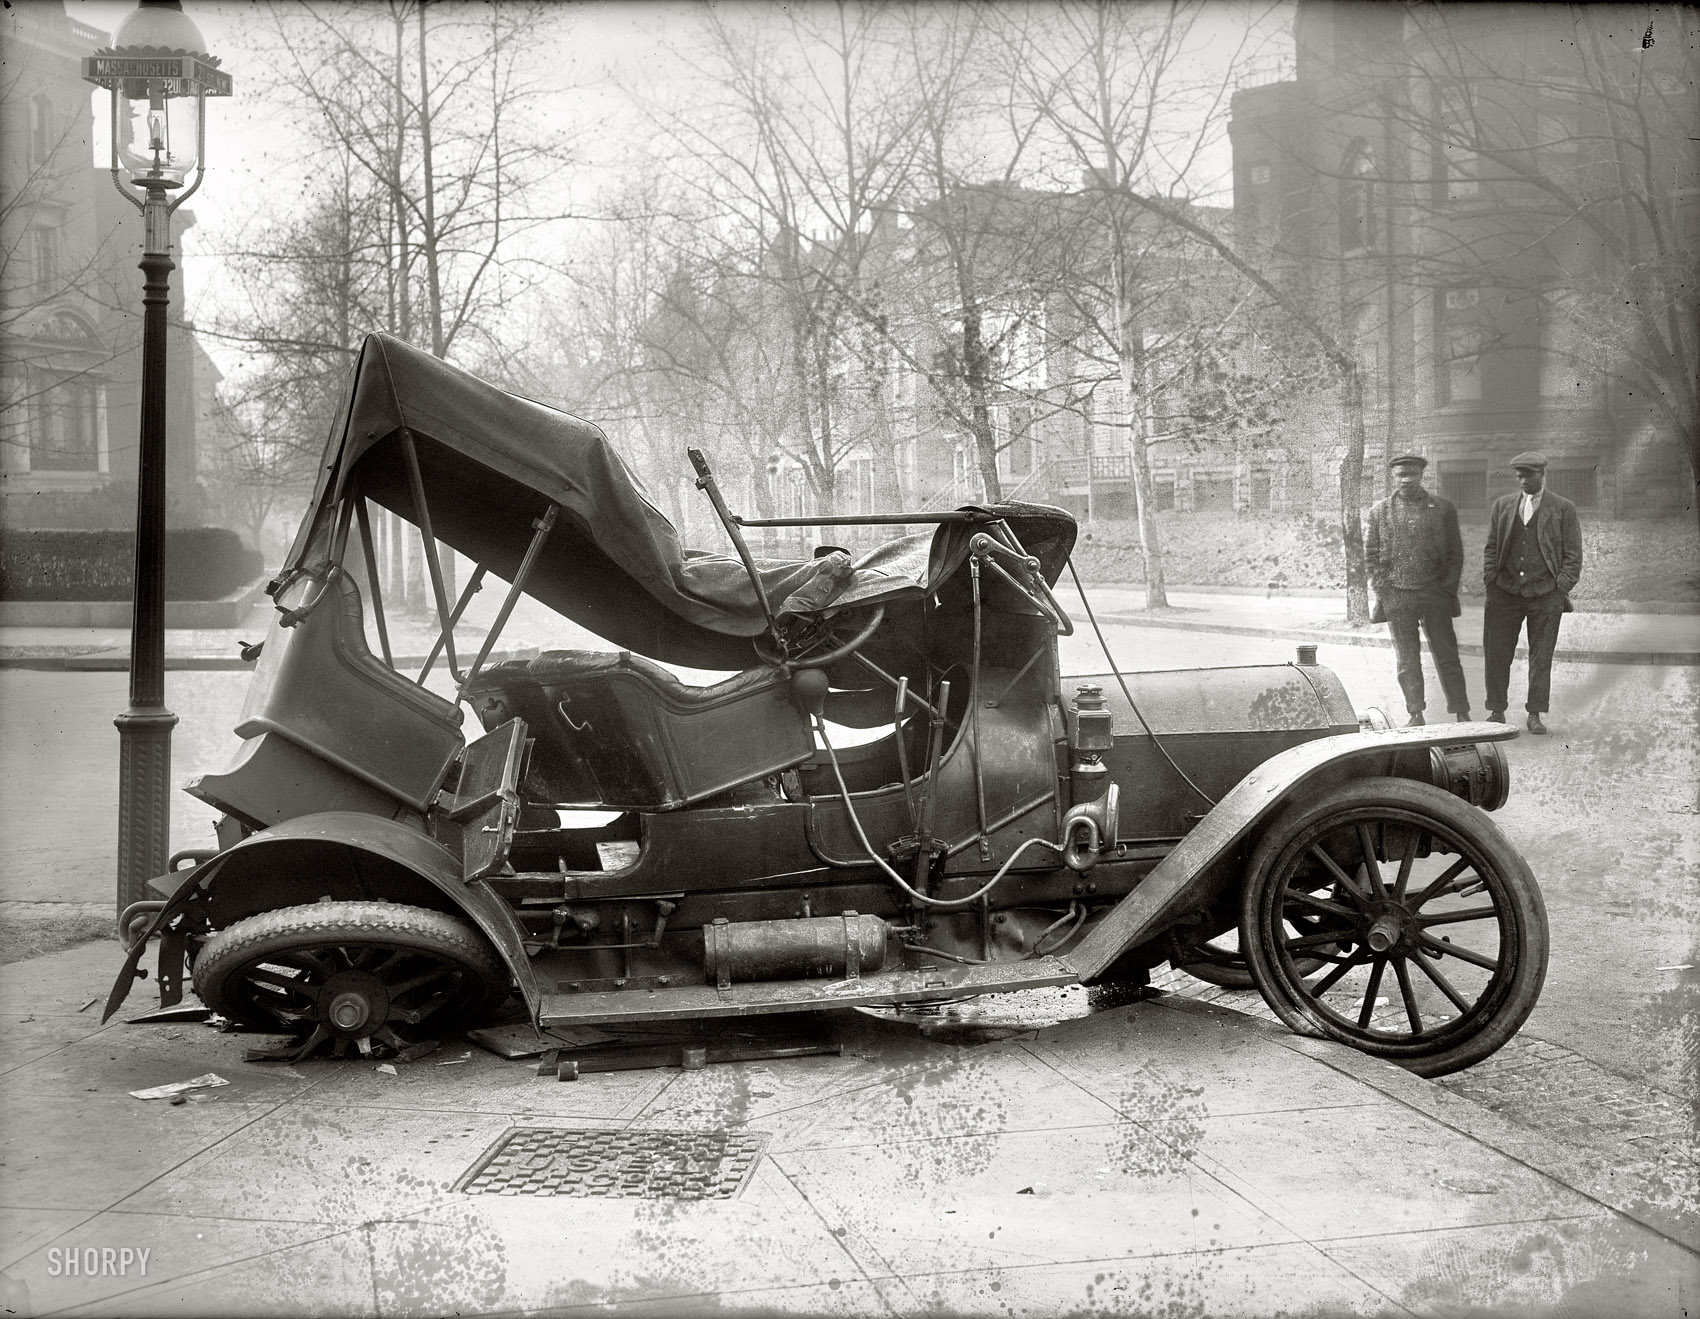 Our third look at that circa 1917 car wreck at Massachusetts Avenue and 21st Street N.W. in Washington. As with so many of these old glass negatives, mold is colonizing the thicker parts of the emulsion. The result is an accident scene that looks like it's been dusted with flour. National Photo Company. View full size.